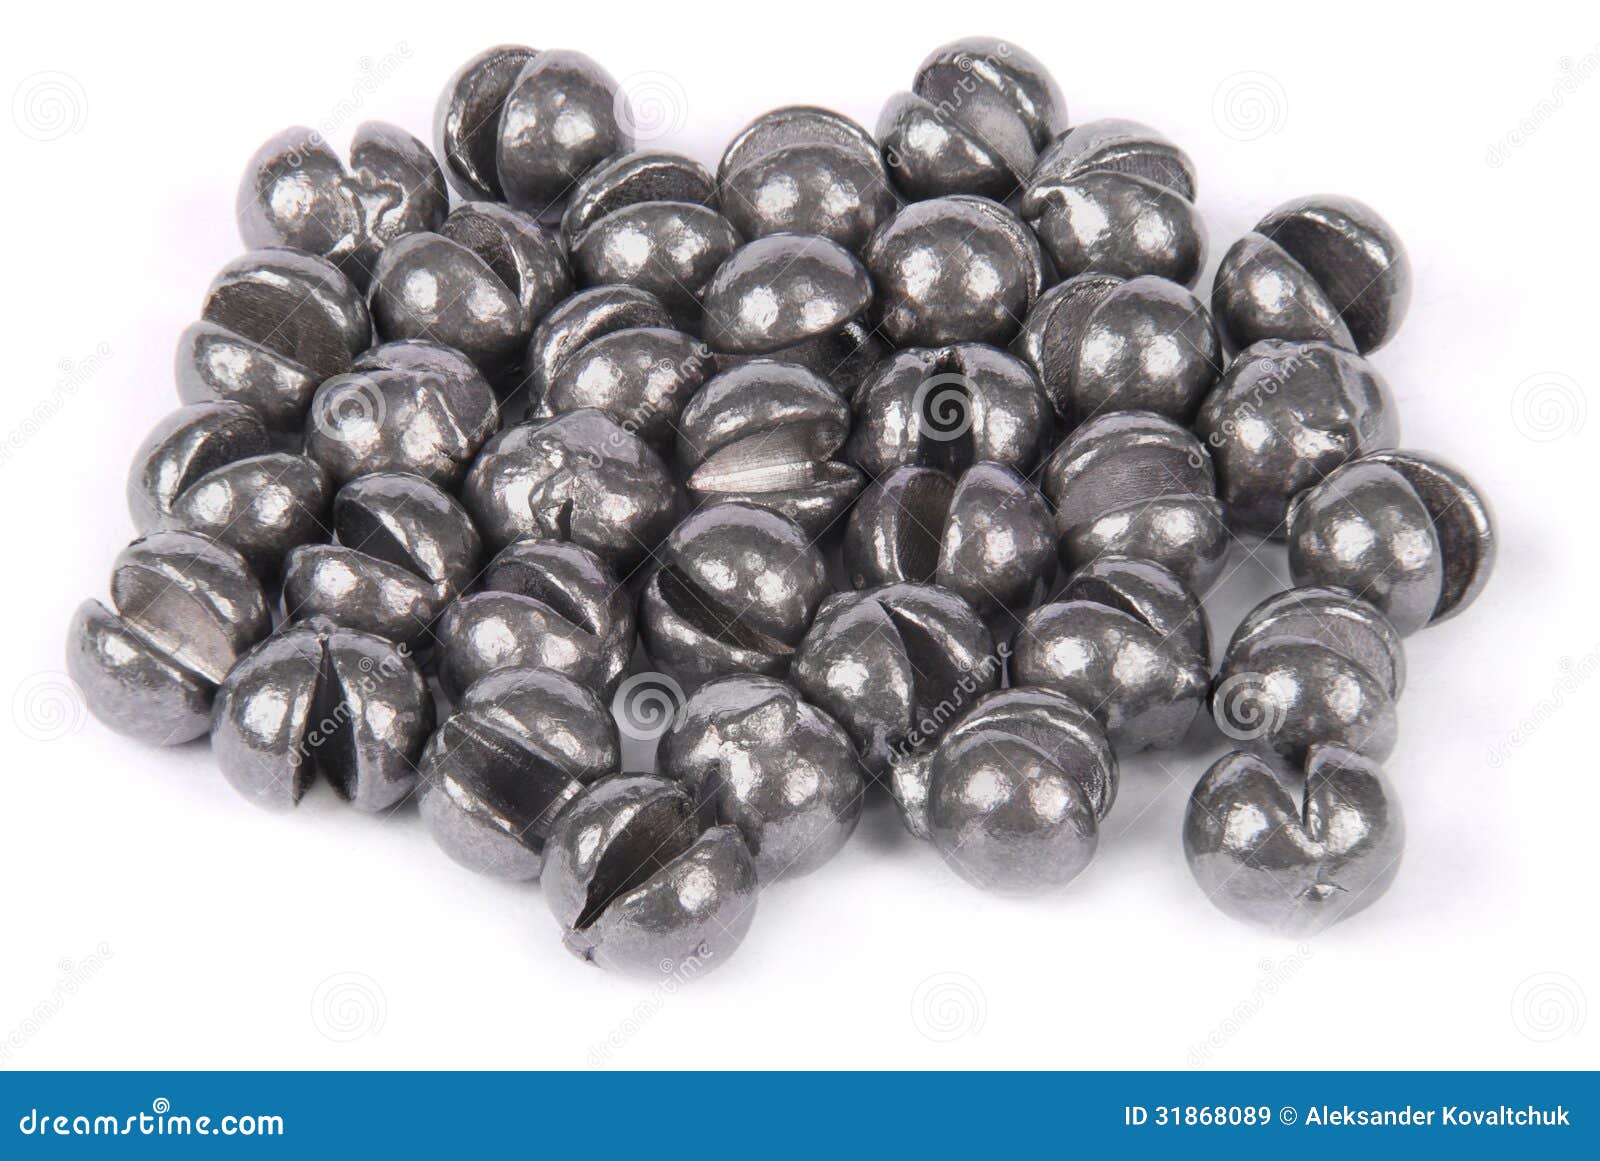 Fishing Sinkers in Weight Two Gramme Stock Image - Image of tackle,  plummet: 31868089